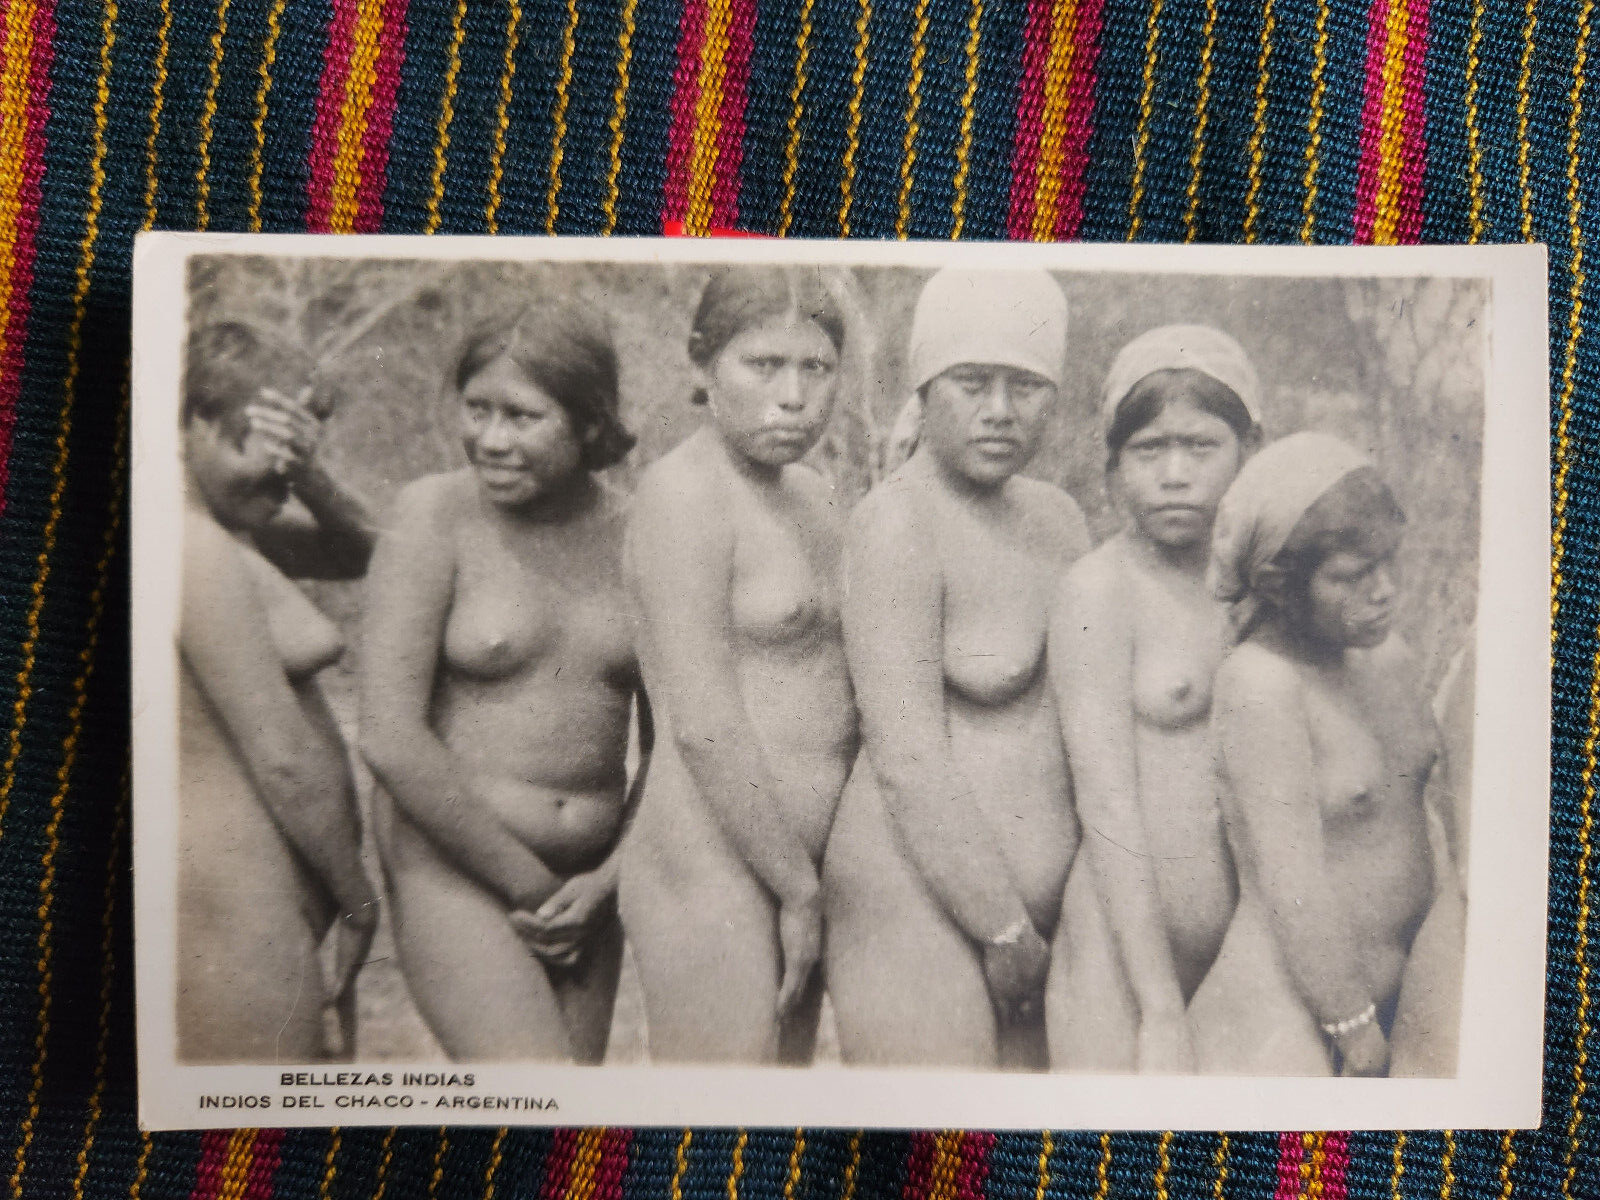 Argentina Chaco nude native girls in lineup Postcard